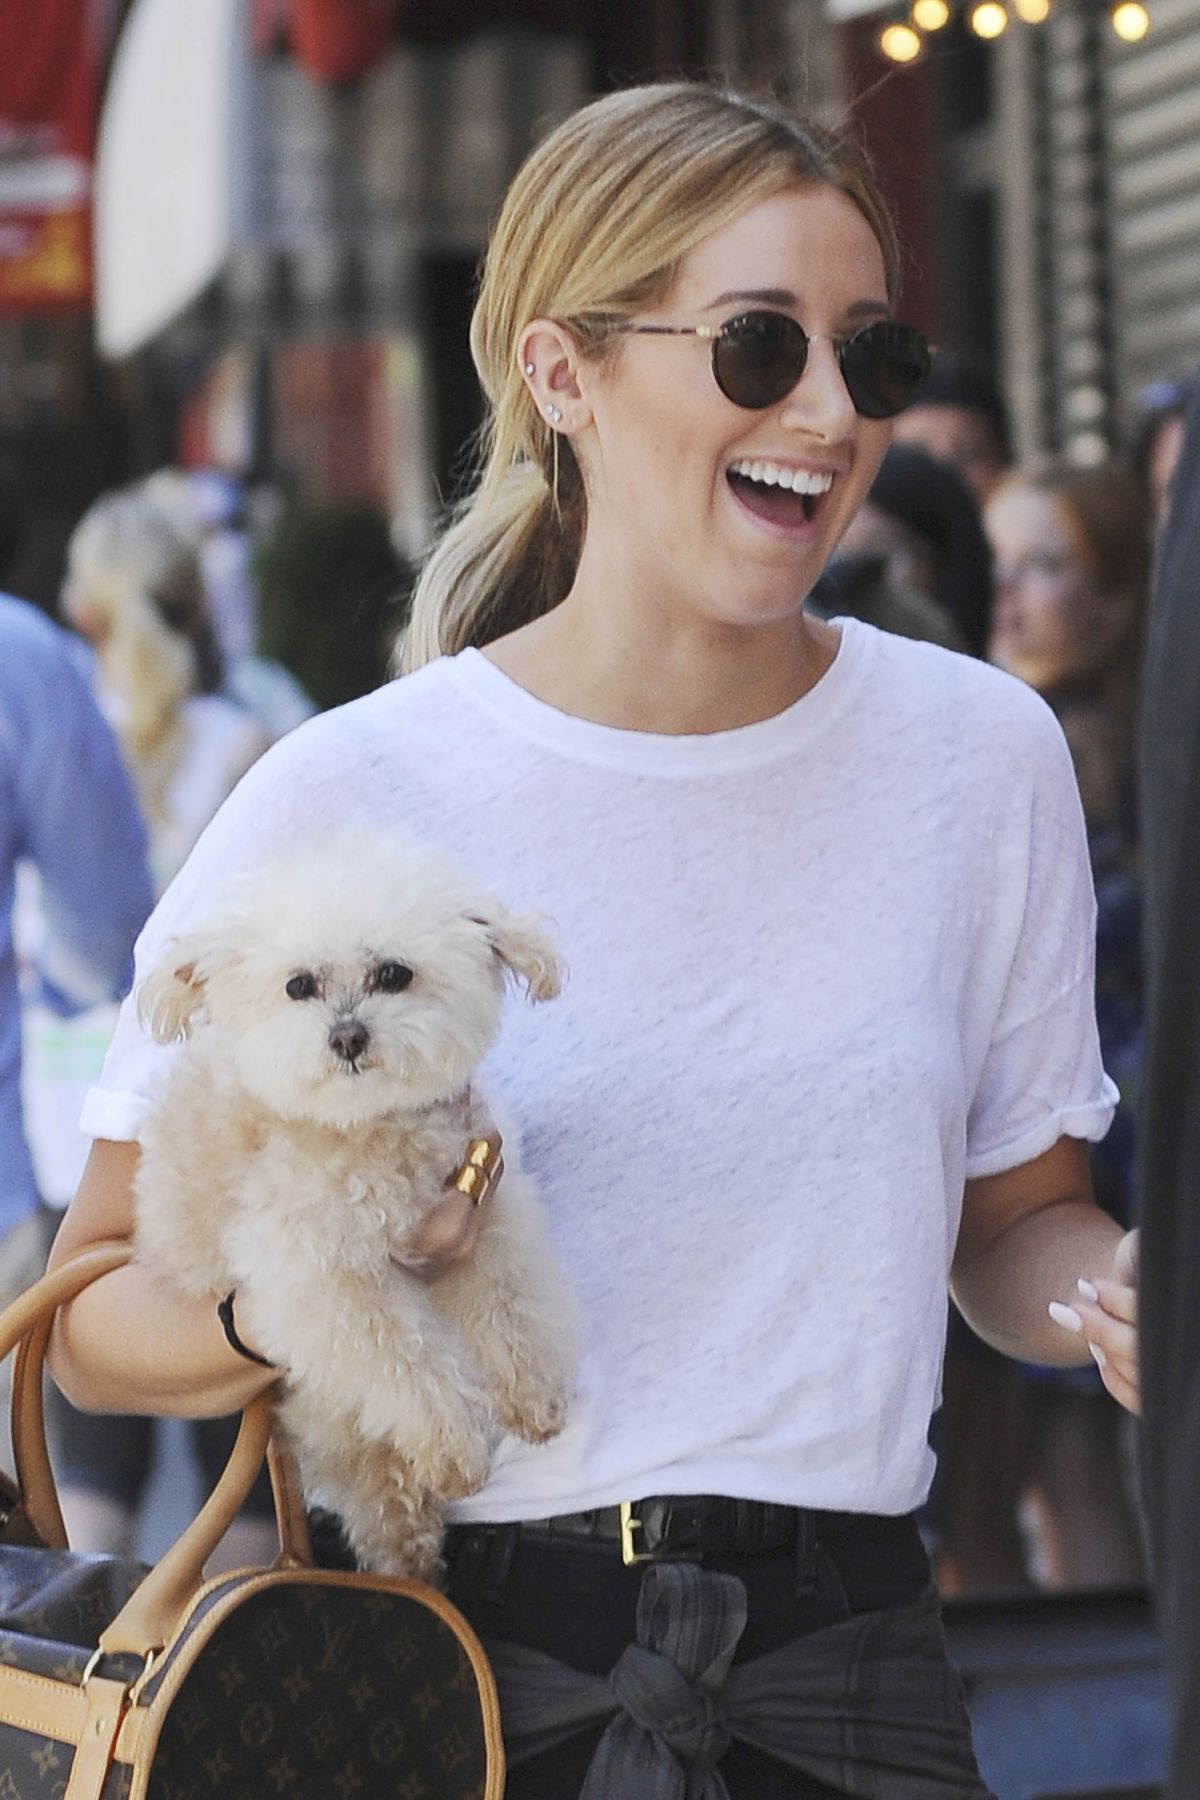 Ashely Tisdale excitedly walking in the street while carrying her Maltese.